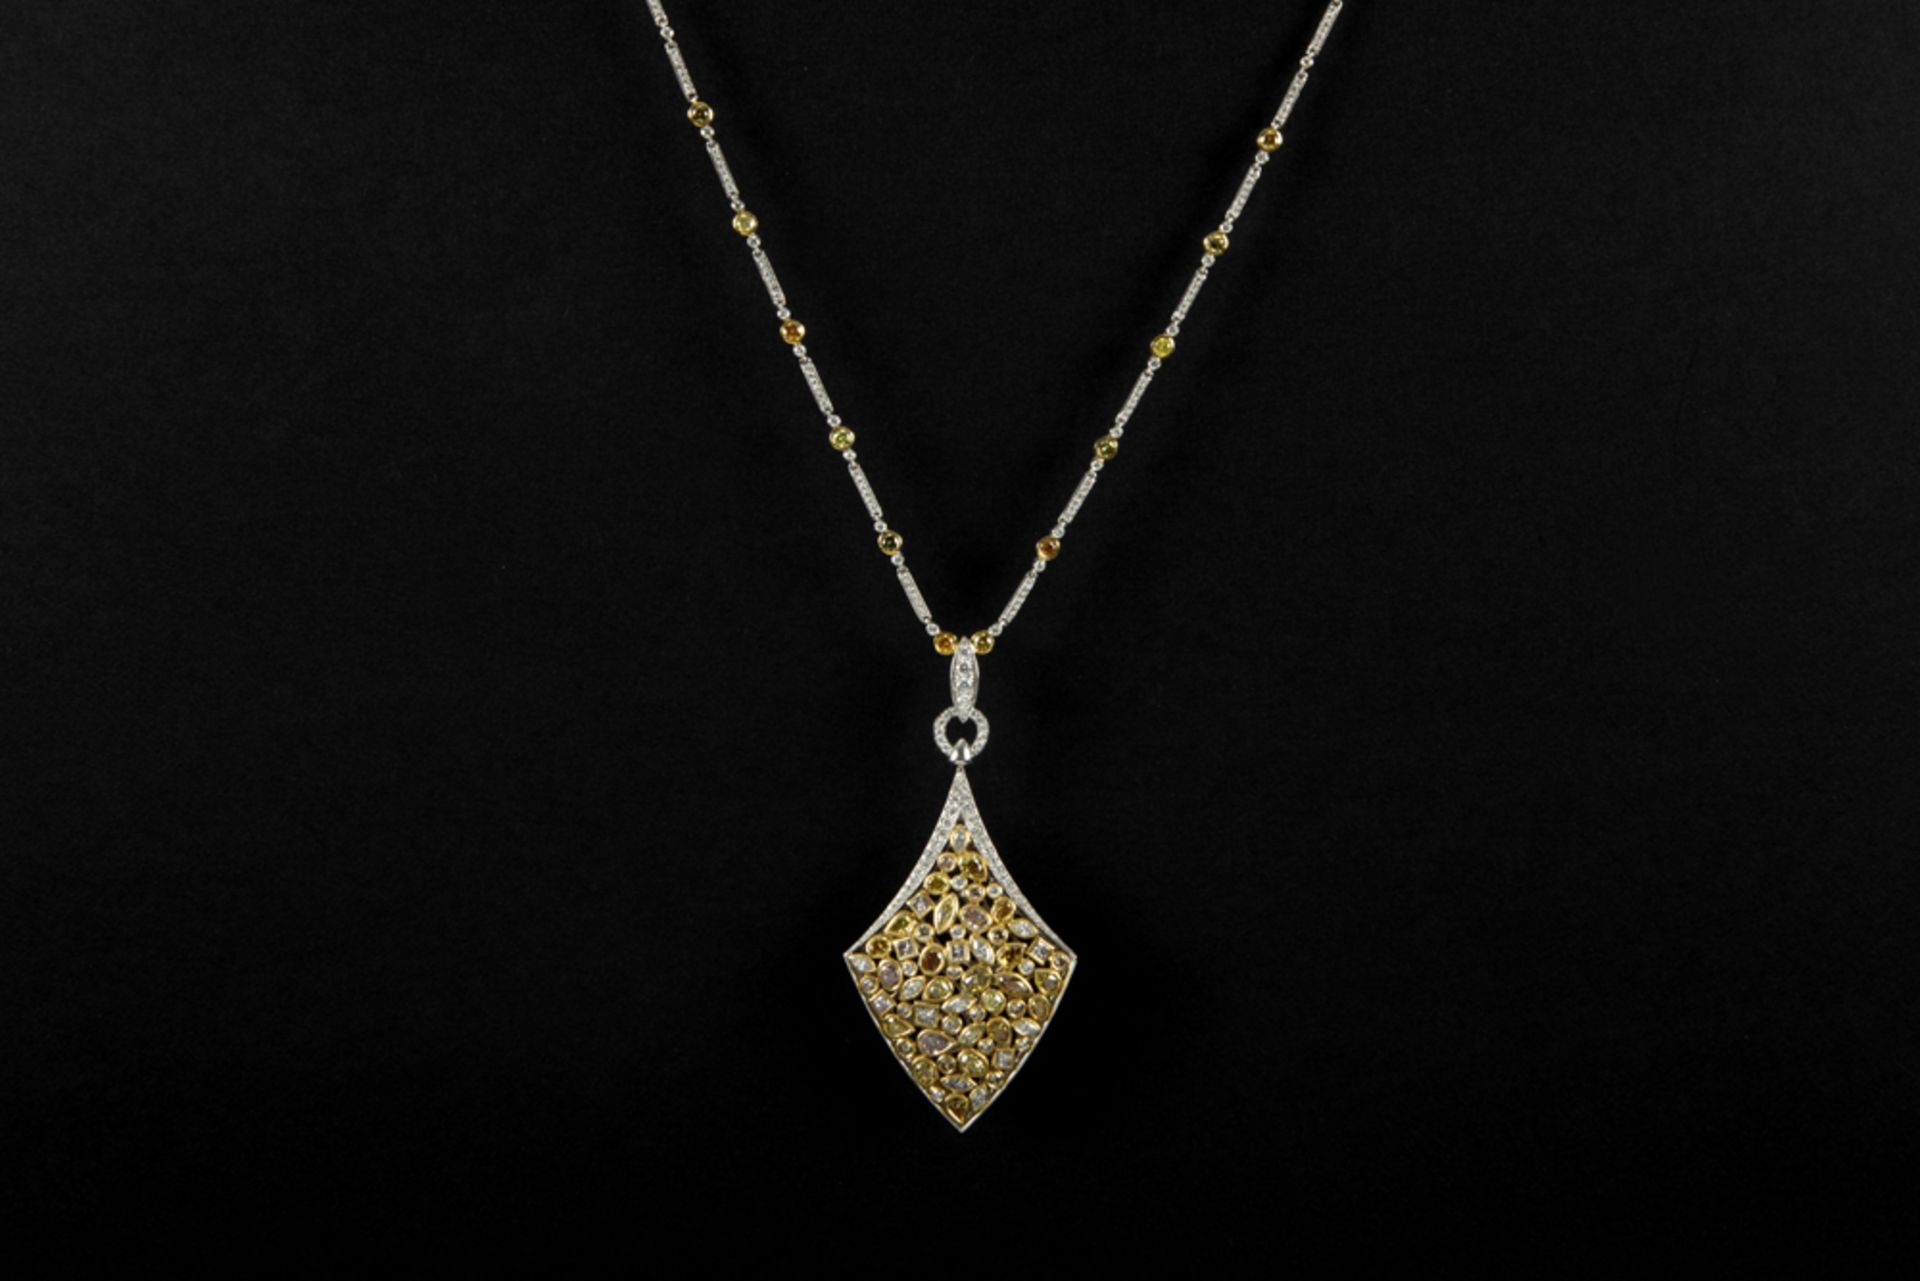 superb pendant with its necklace in yellow and white gold (18 carat) with ca 12 carat of white (G) - Bild 2 aus 3